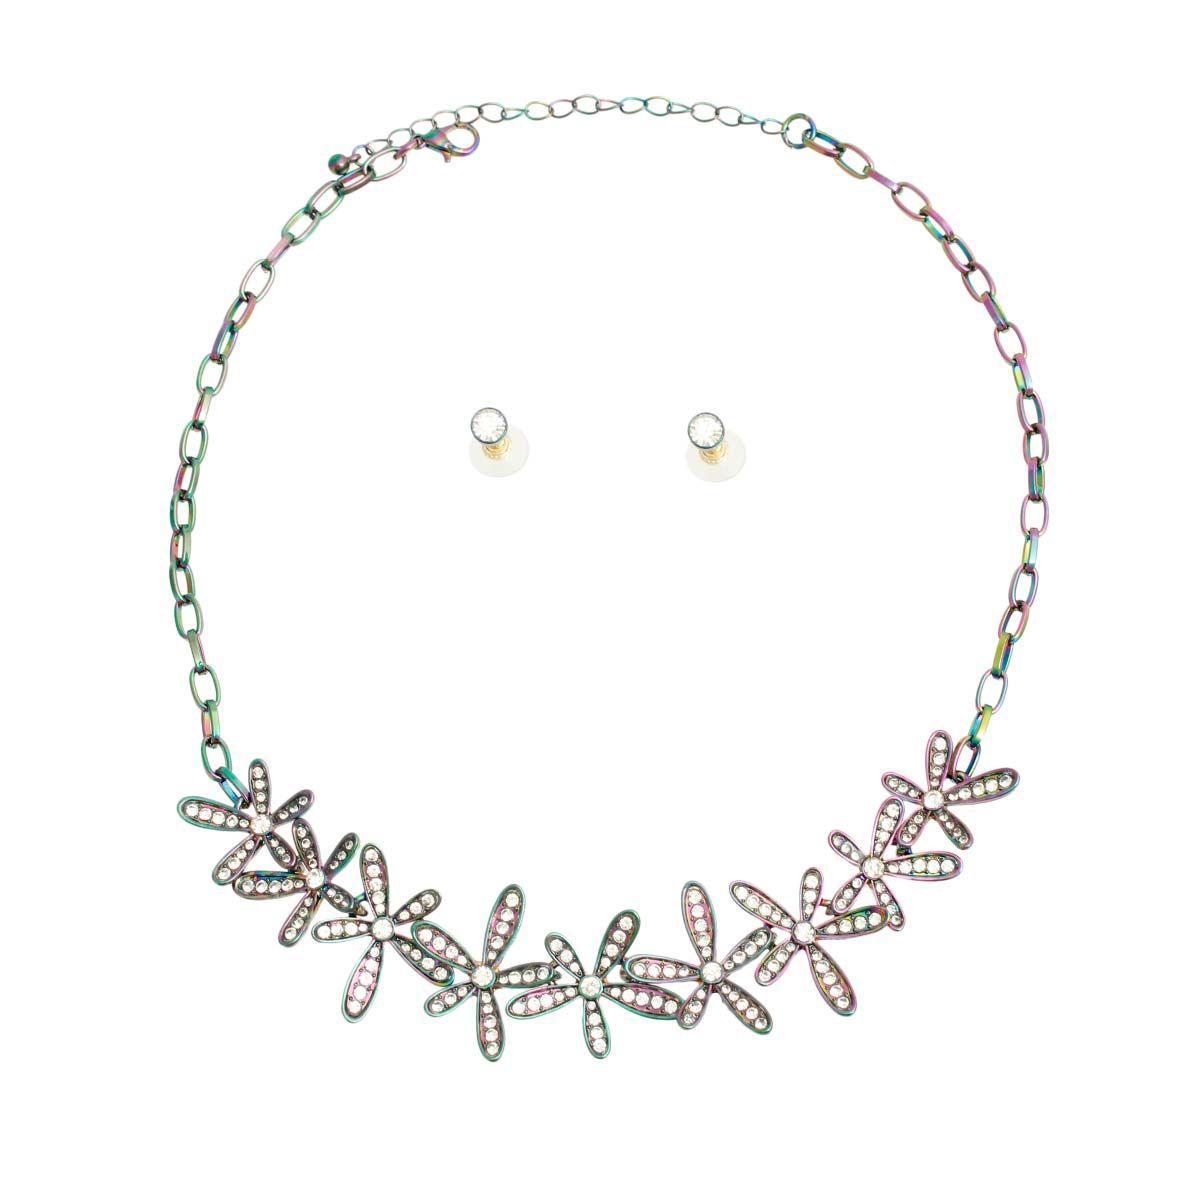 Stunning Flower Cluster Collar Necklace Set - Add a Pop of Color Today!